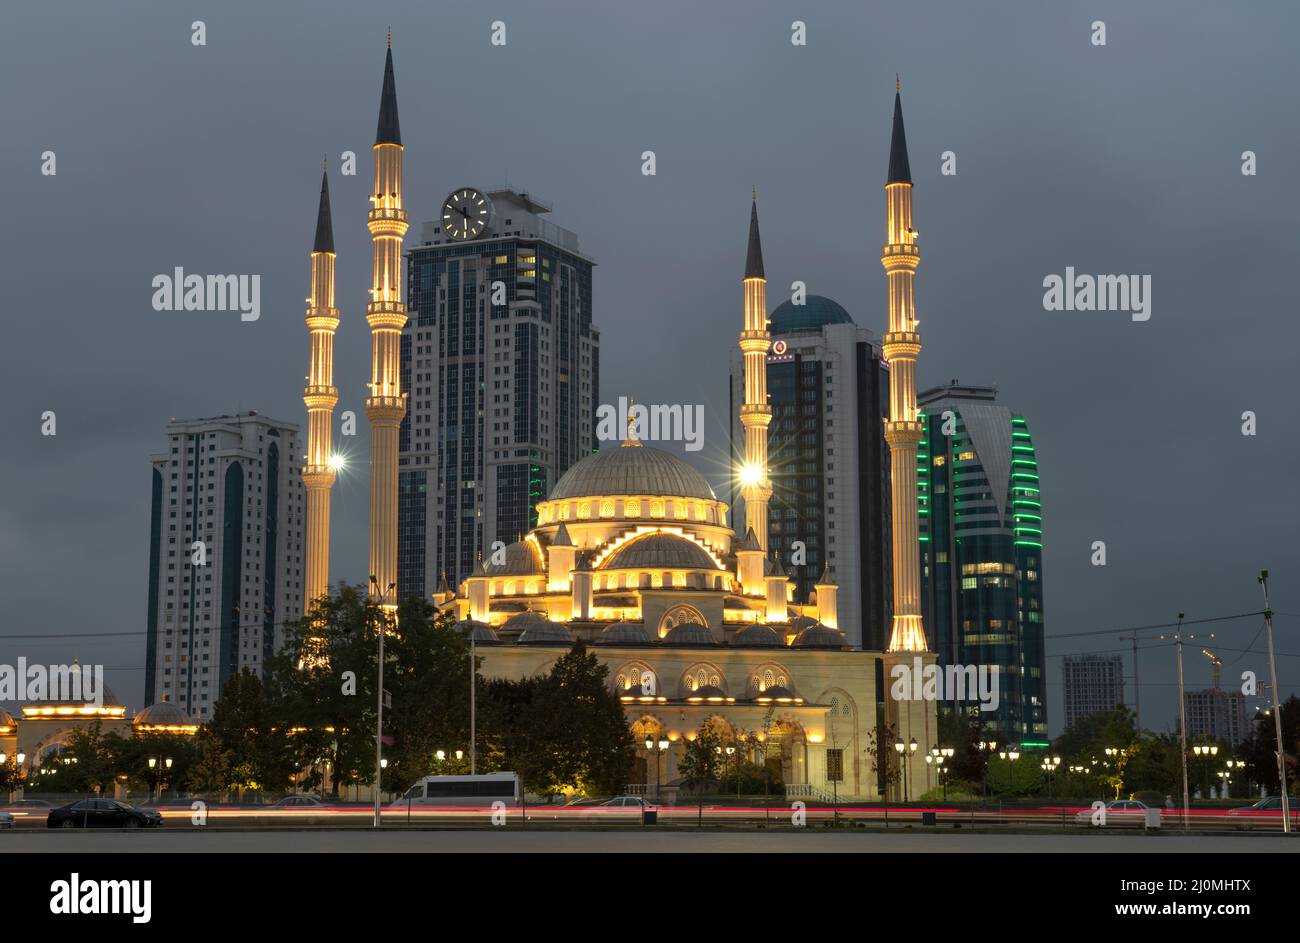 GROZNY, RUSSIA - SEPTEMBER 29, 2021: The Heart of Chechnya Mosque in the night urban landscape. Grozny, Chechen Republic Stock Photo